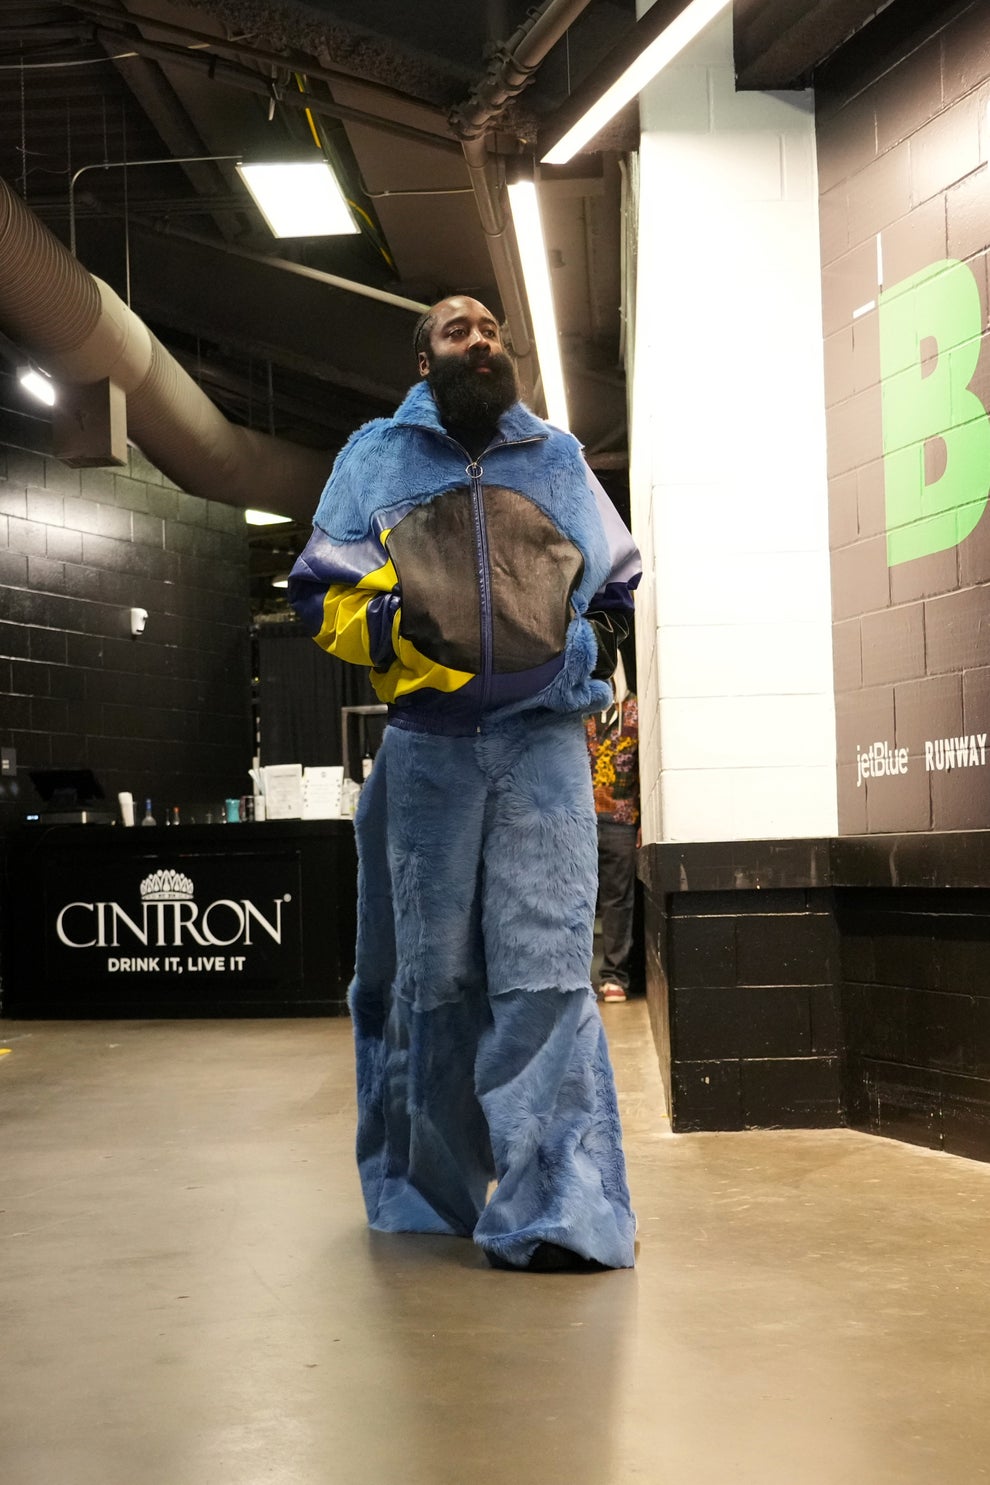 James Harden: Clothes, Outfits, Brands, Style and Looks